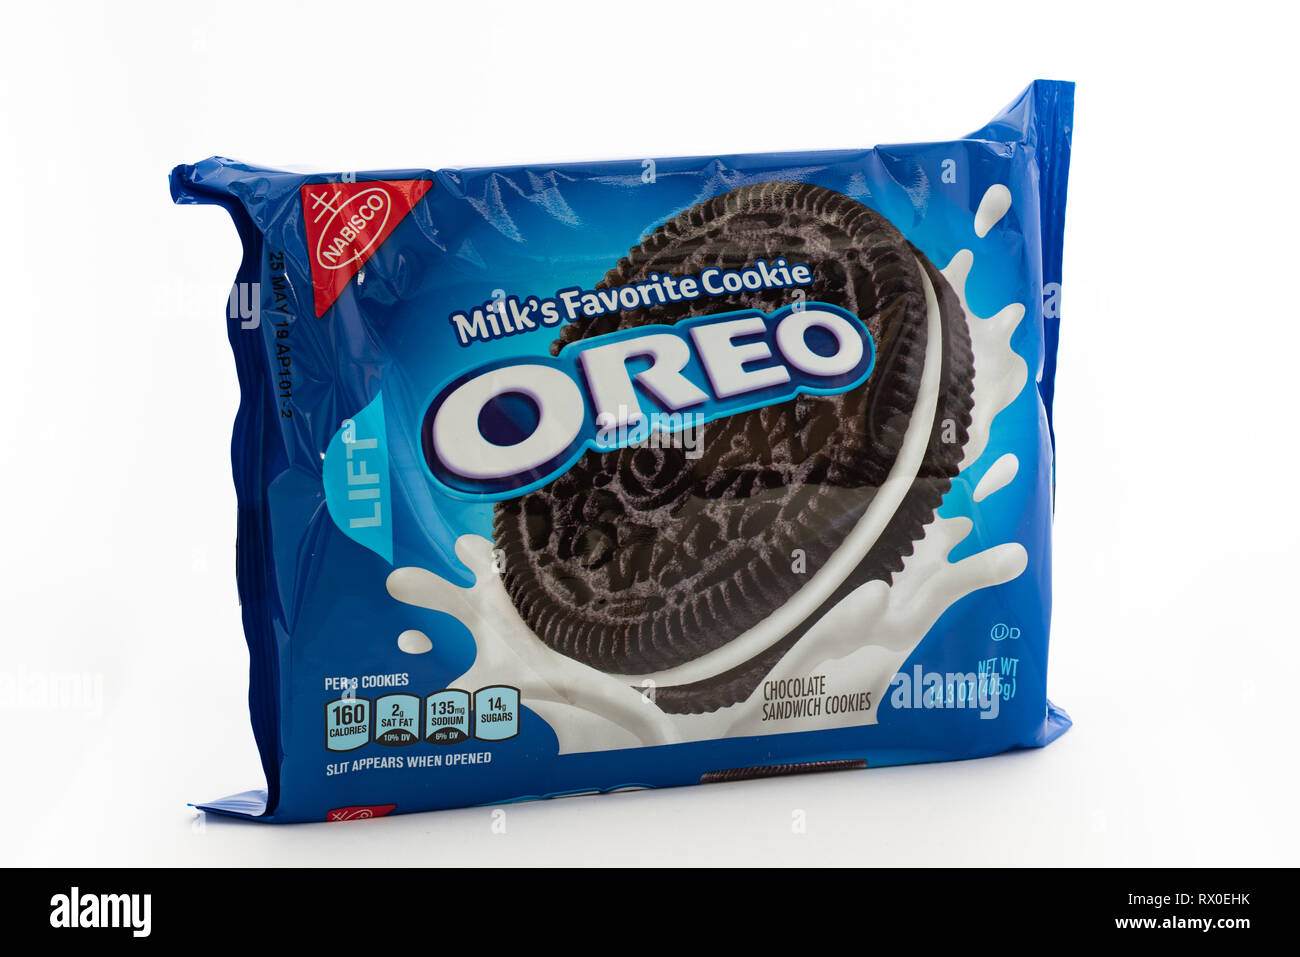 A bright blue package of traditional Oreo Cookies, Milk's Favorite Cookie Stock Photo